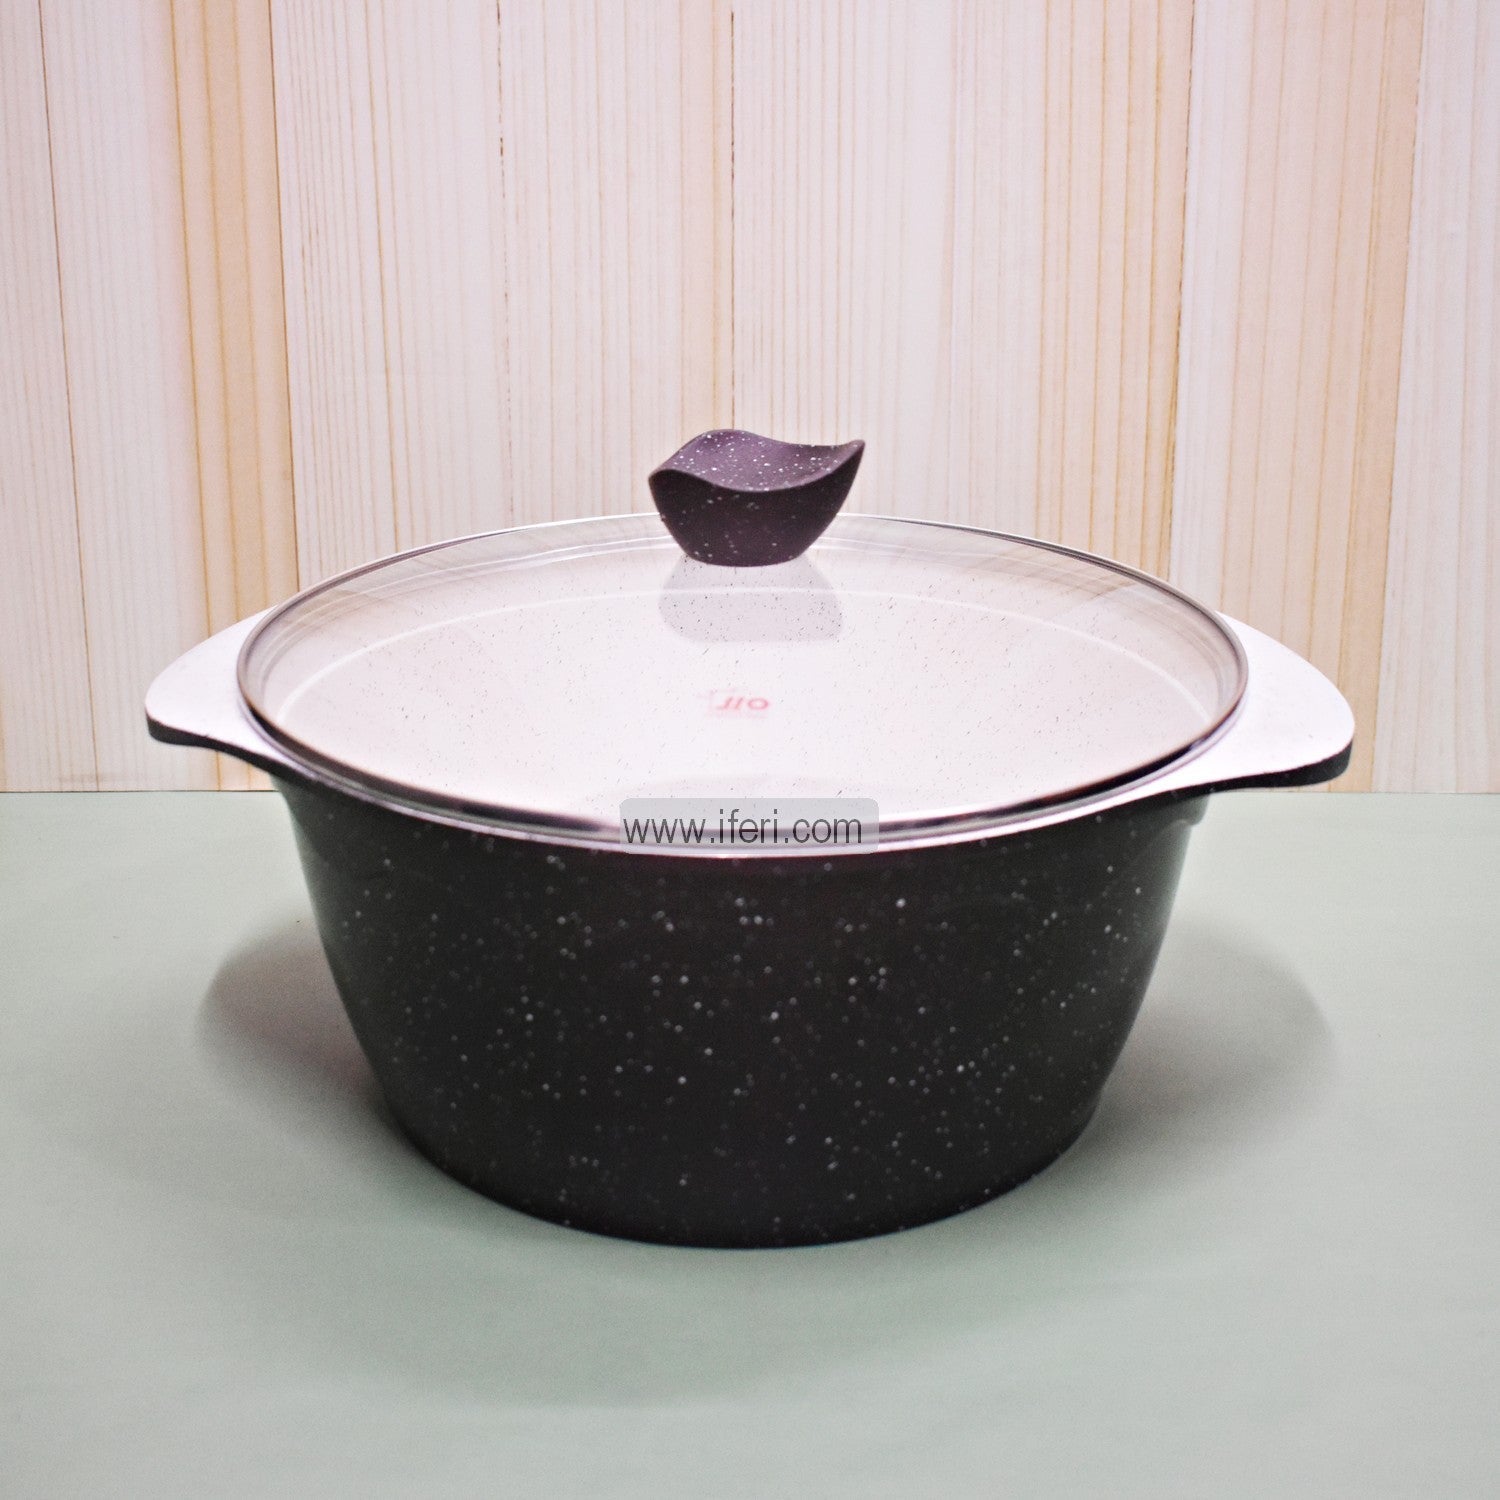 26cm JIO Non Stick Granite Coated Cookware with Lid RH1864